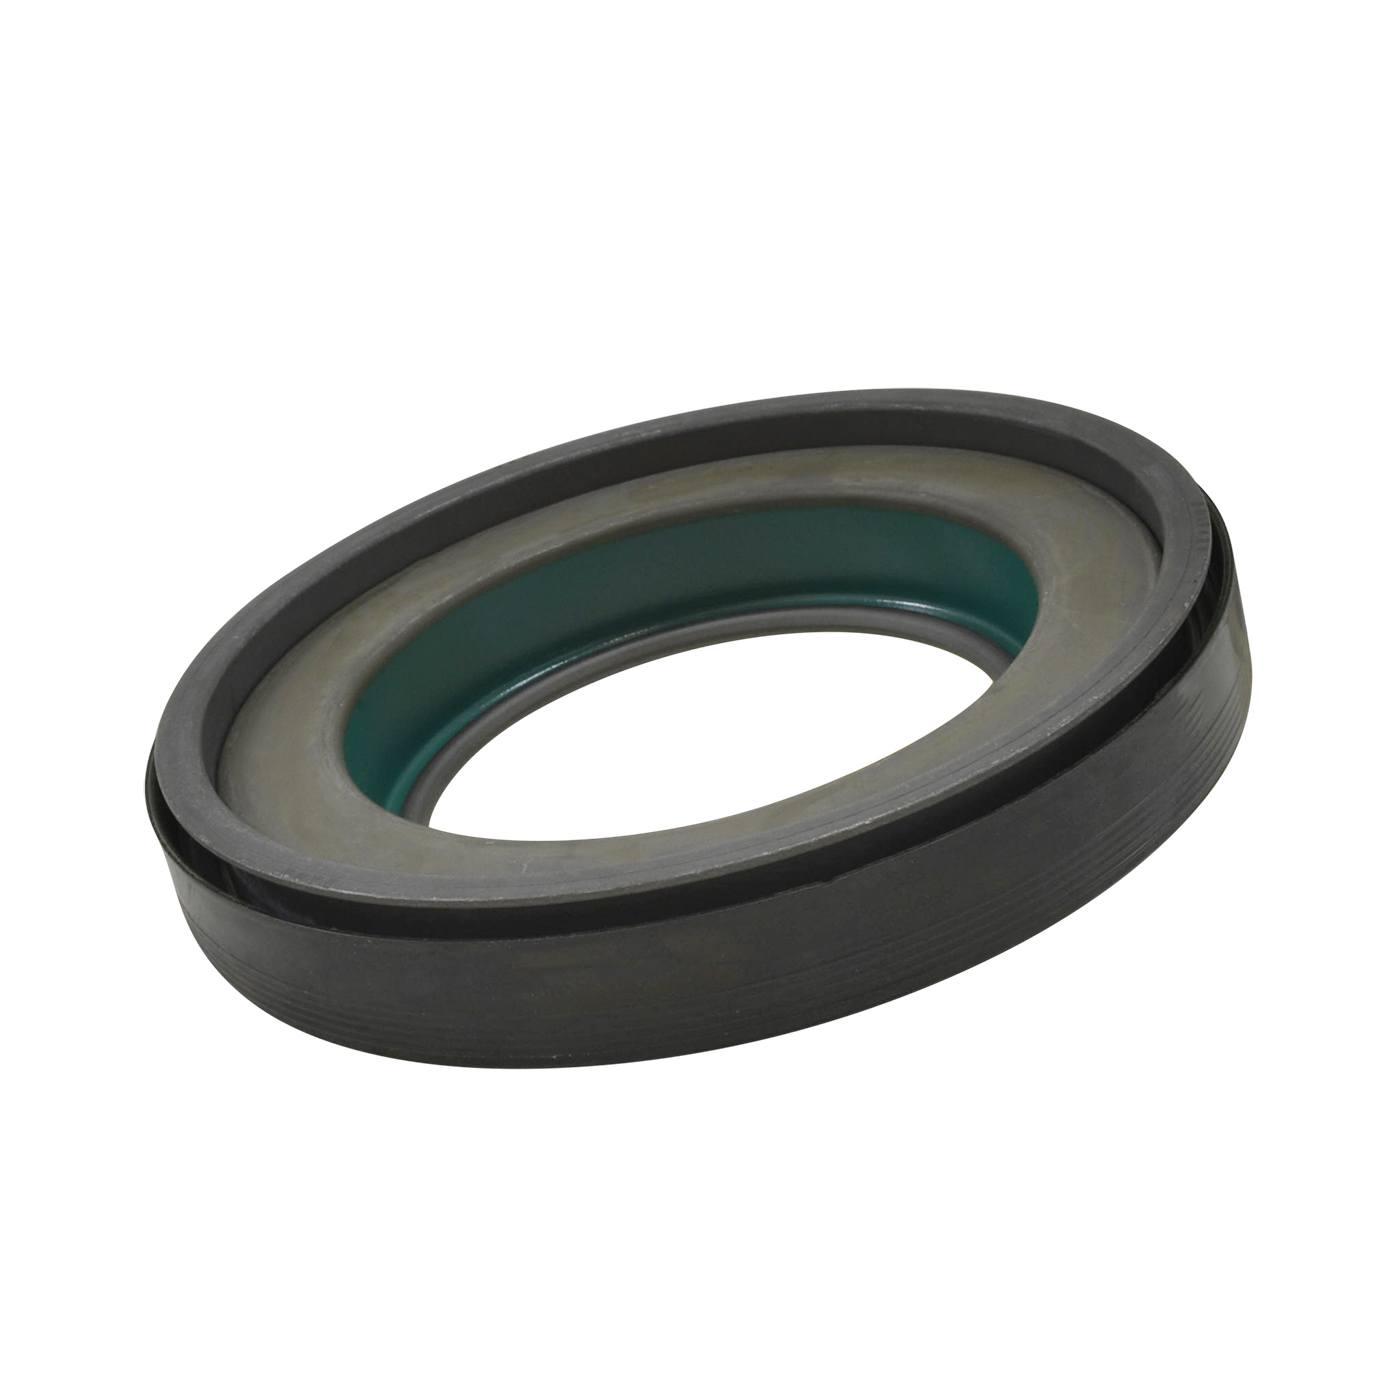 Replacement outer unit bearing seal for '05 & up Ford Dana 60 